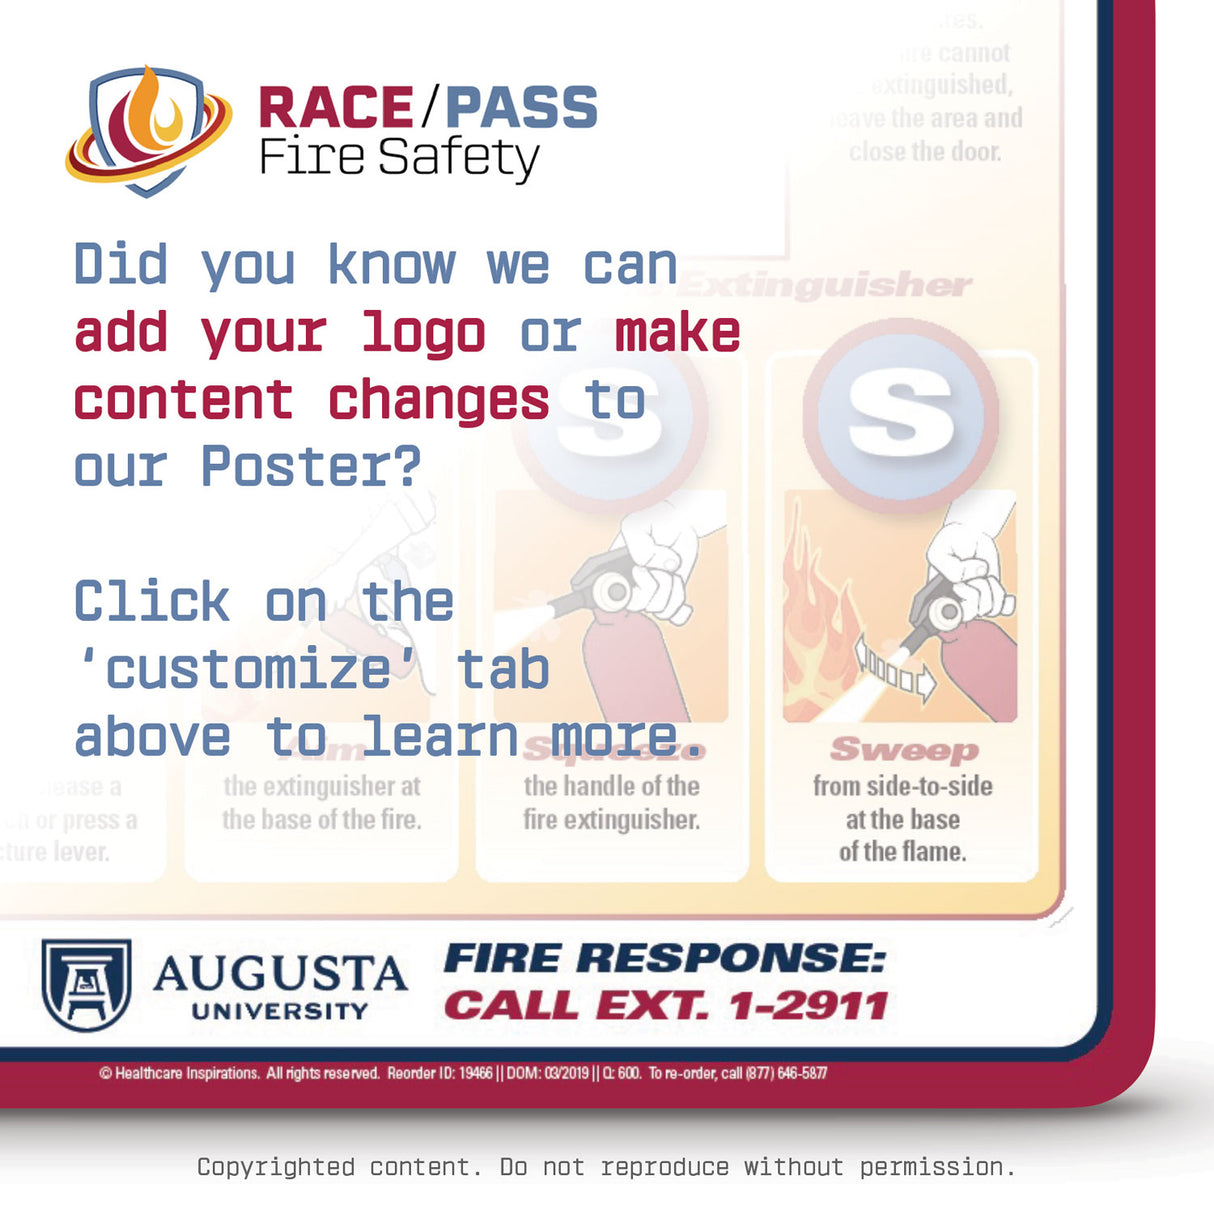 RACE/PASS Fire Safety Poster.  Did you know we offer customization options for our Badgie Cards? You can add your logo or make content changes. Just click on the Customize tab above to learn more.